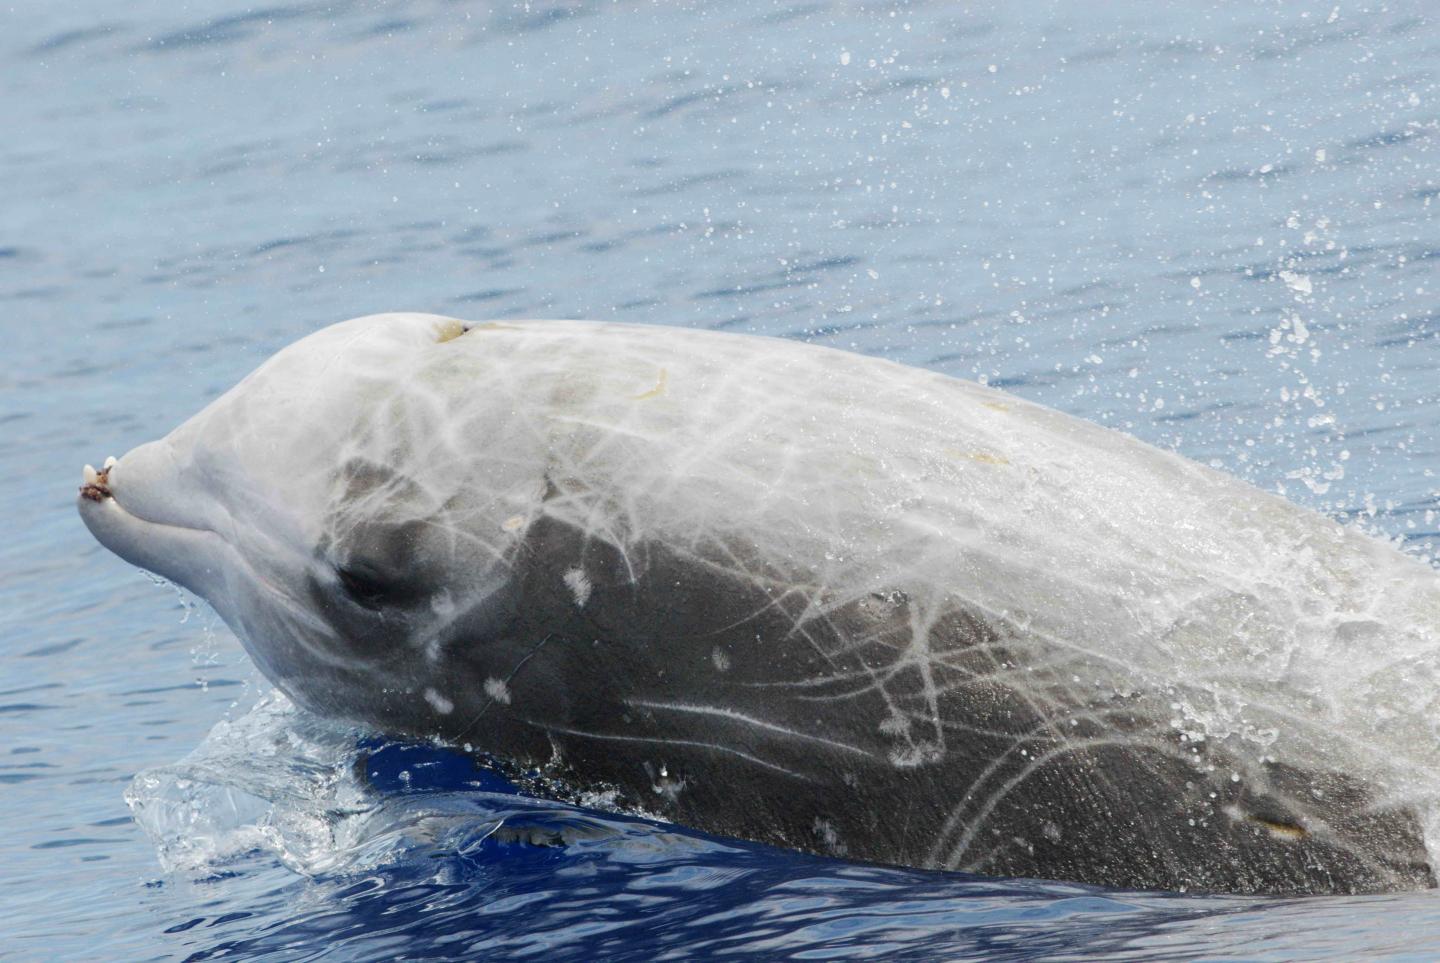 Two Beaked Whale Species Take Very Long, Deep Dives for Their Size